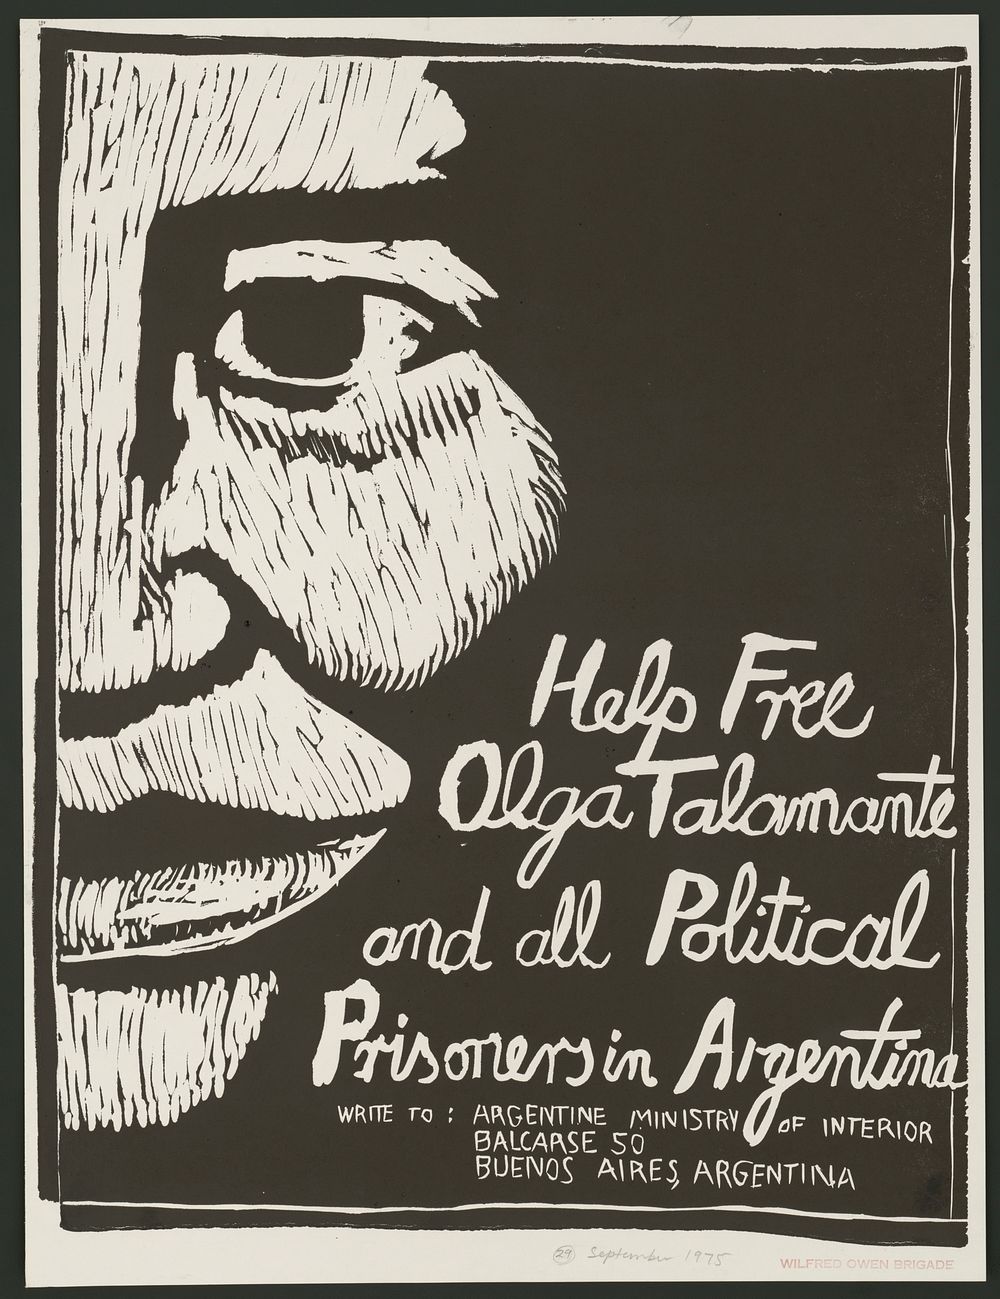 Help free Olga Talamante and all political prisoners in Argentina